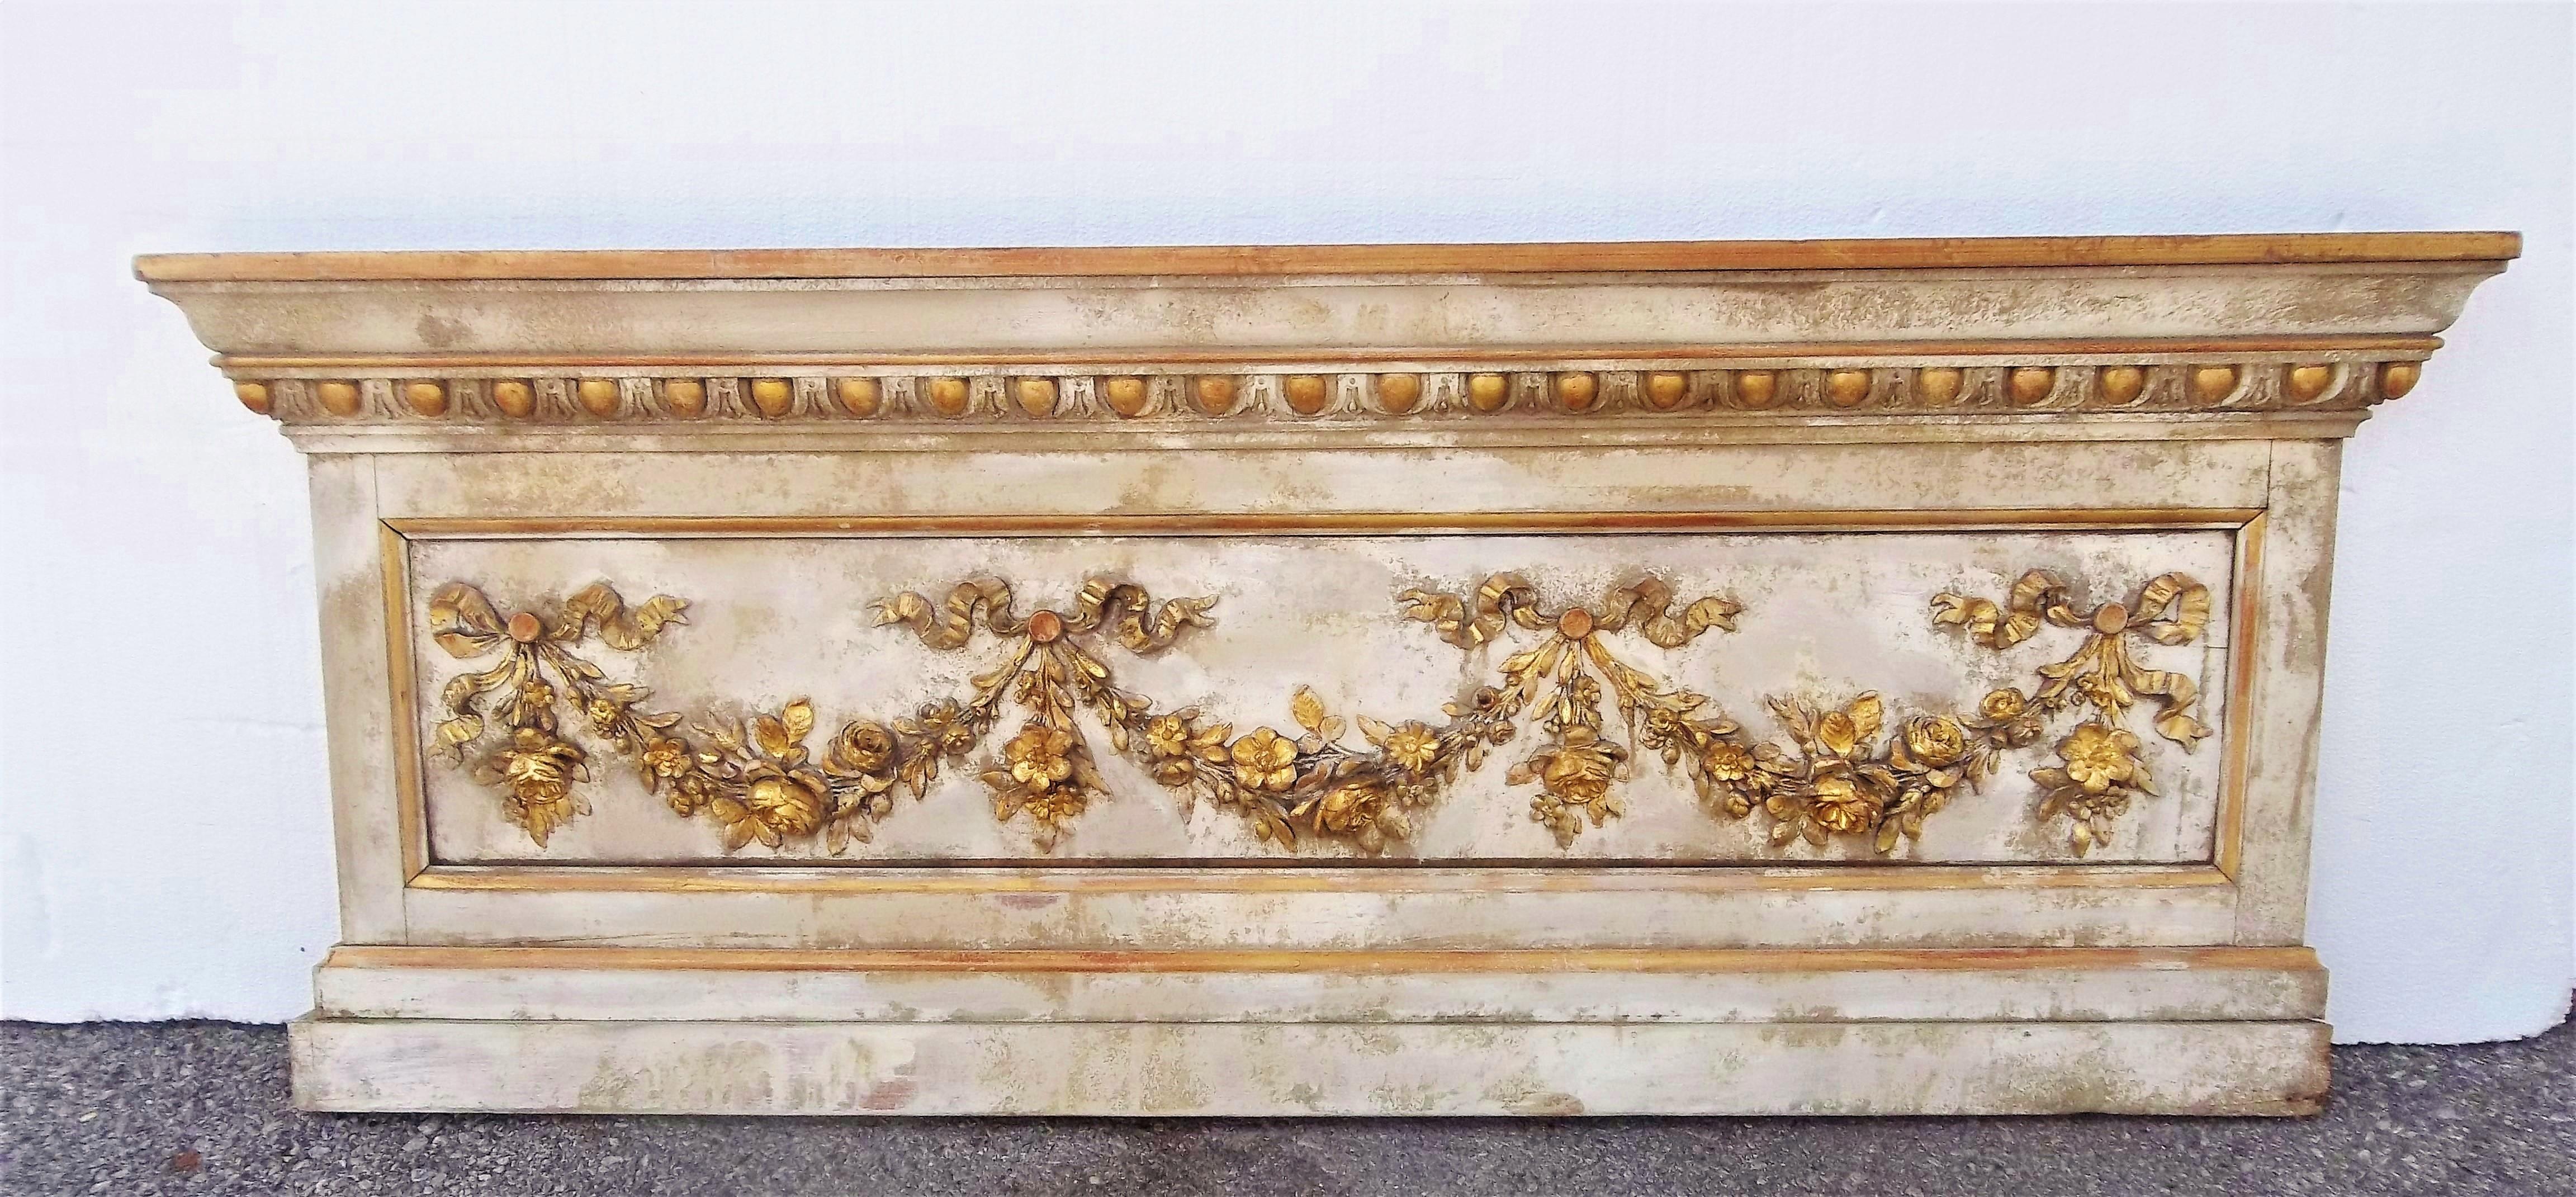 With floral festoons hung in garland form. Wear to paint and gilding as shown in photos. Centre panel (with the garlands) has a bow, more obvious from the back. Probably from a ballroom (or at least a formal room)

Gilding worn in places with red